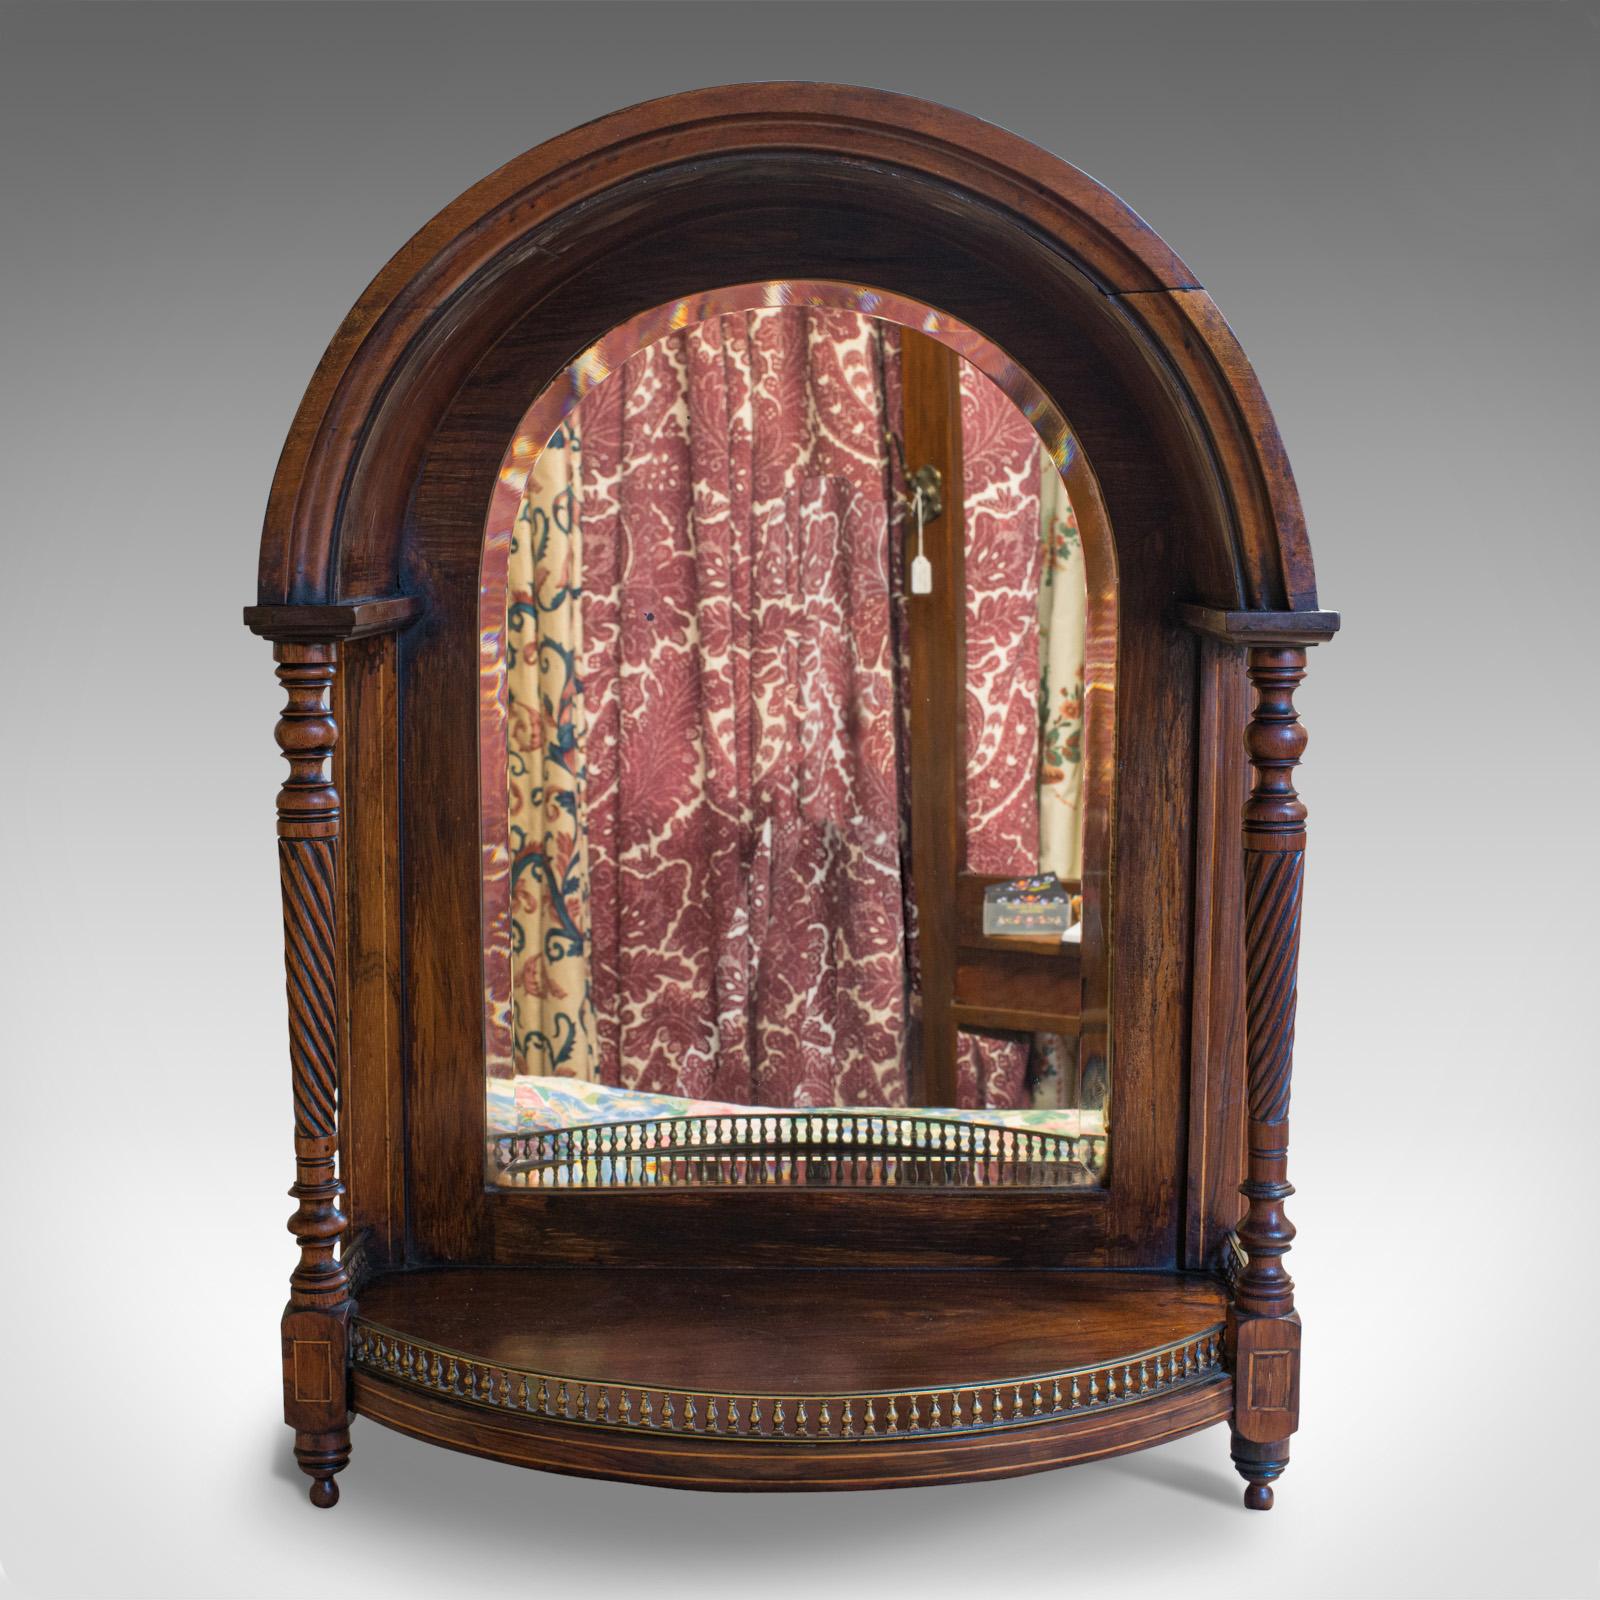 This is an antique butler's mirror. An English, Rosewood dome top wall mirror, dating to the Victorian period, circa 1880.

Elegant mirror with attractive dome top
Displays a desirable aged patina
Select rosewood shows fine grain interest and